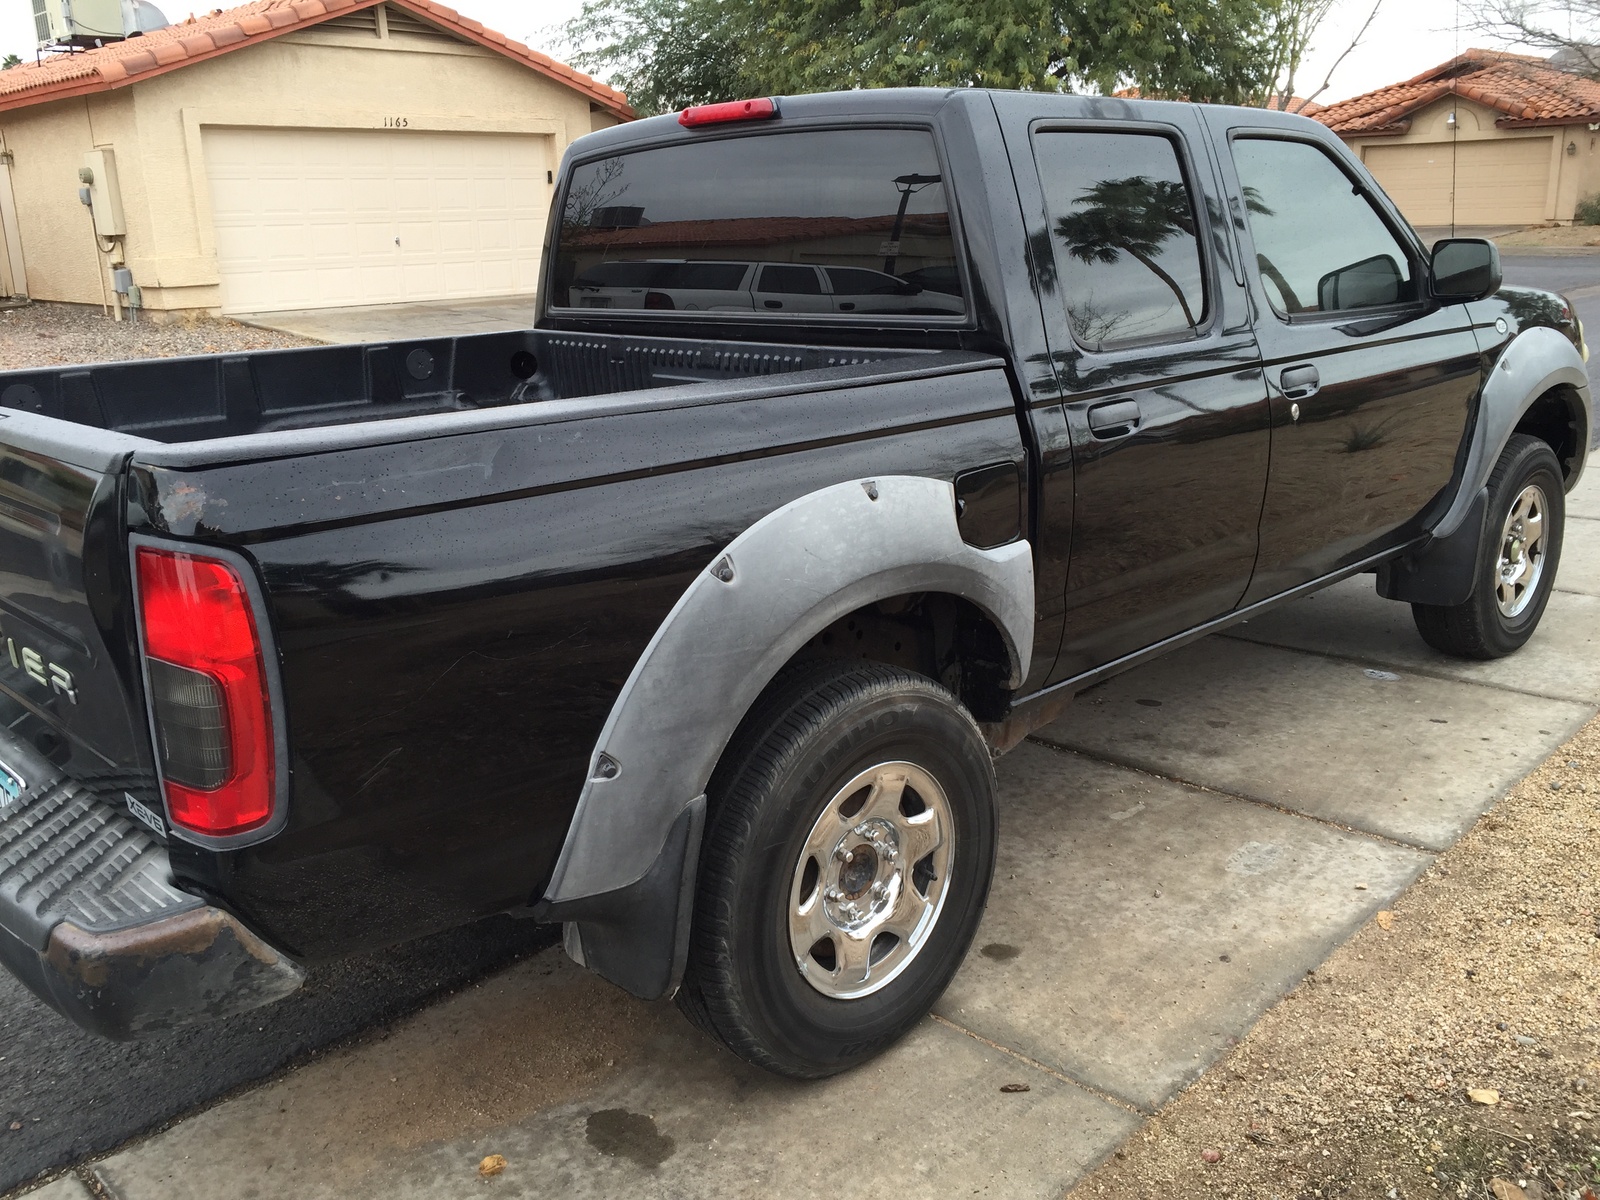 2001 Nissan frontier crew cab supercharged mpg #2